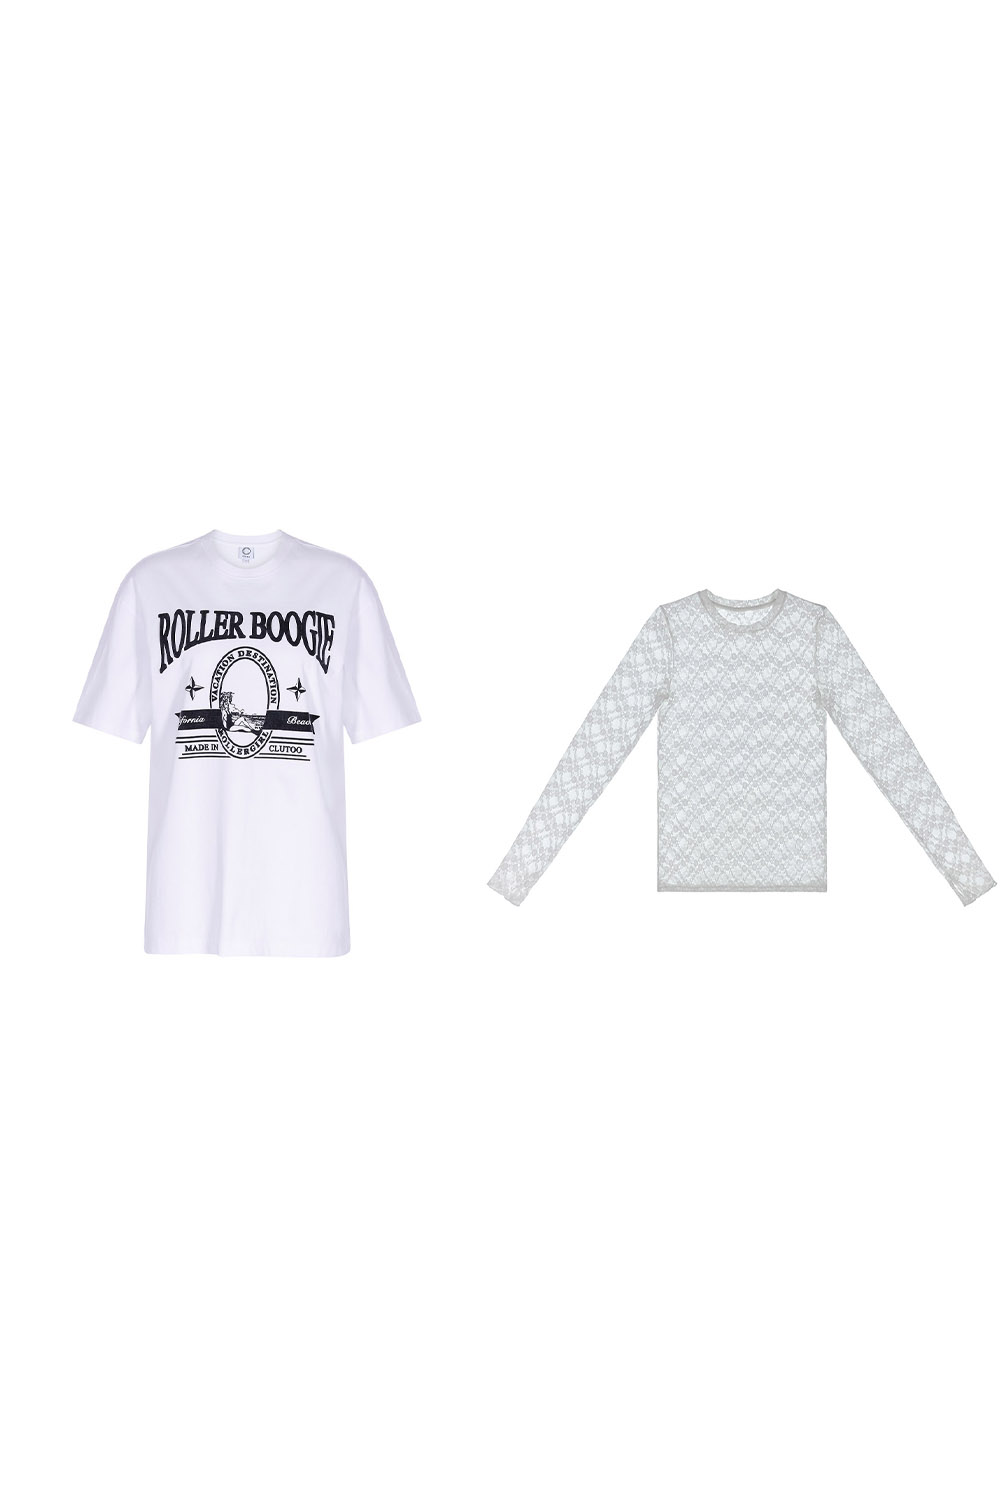 Cali T-shirts_white+Misty lace Top_white